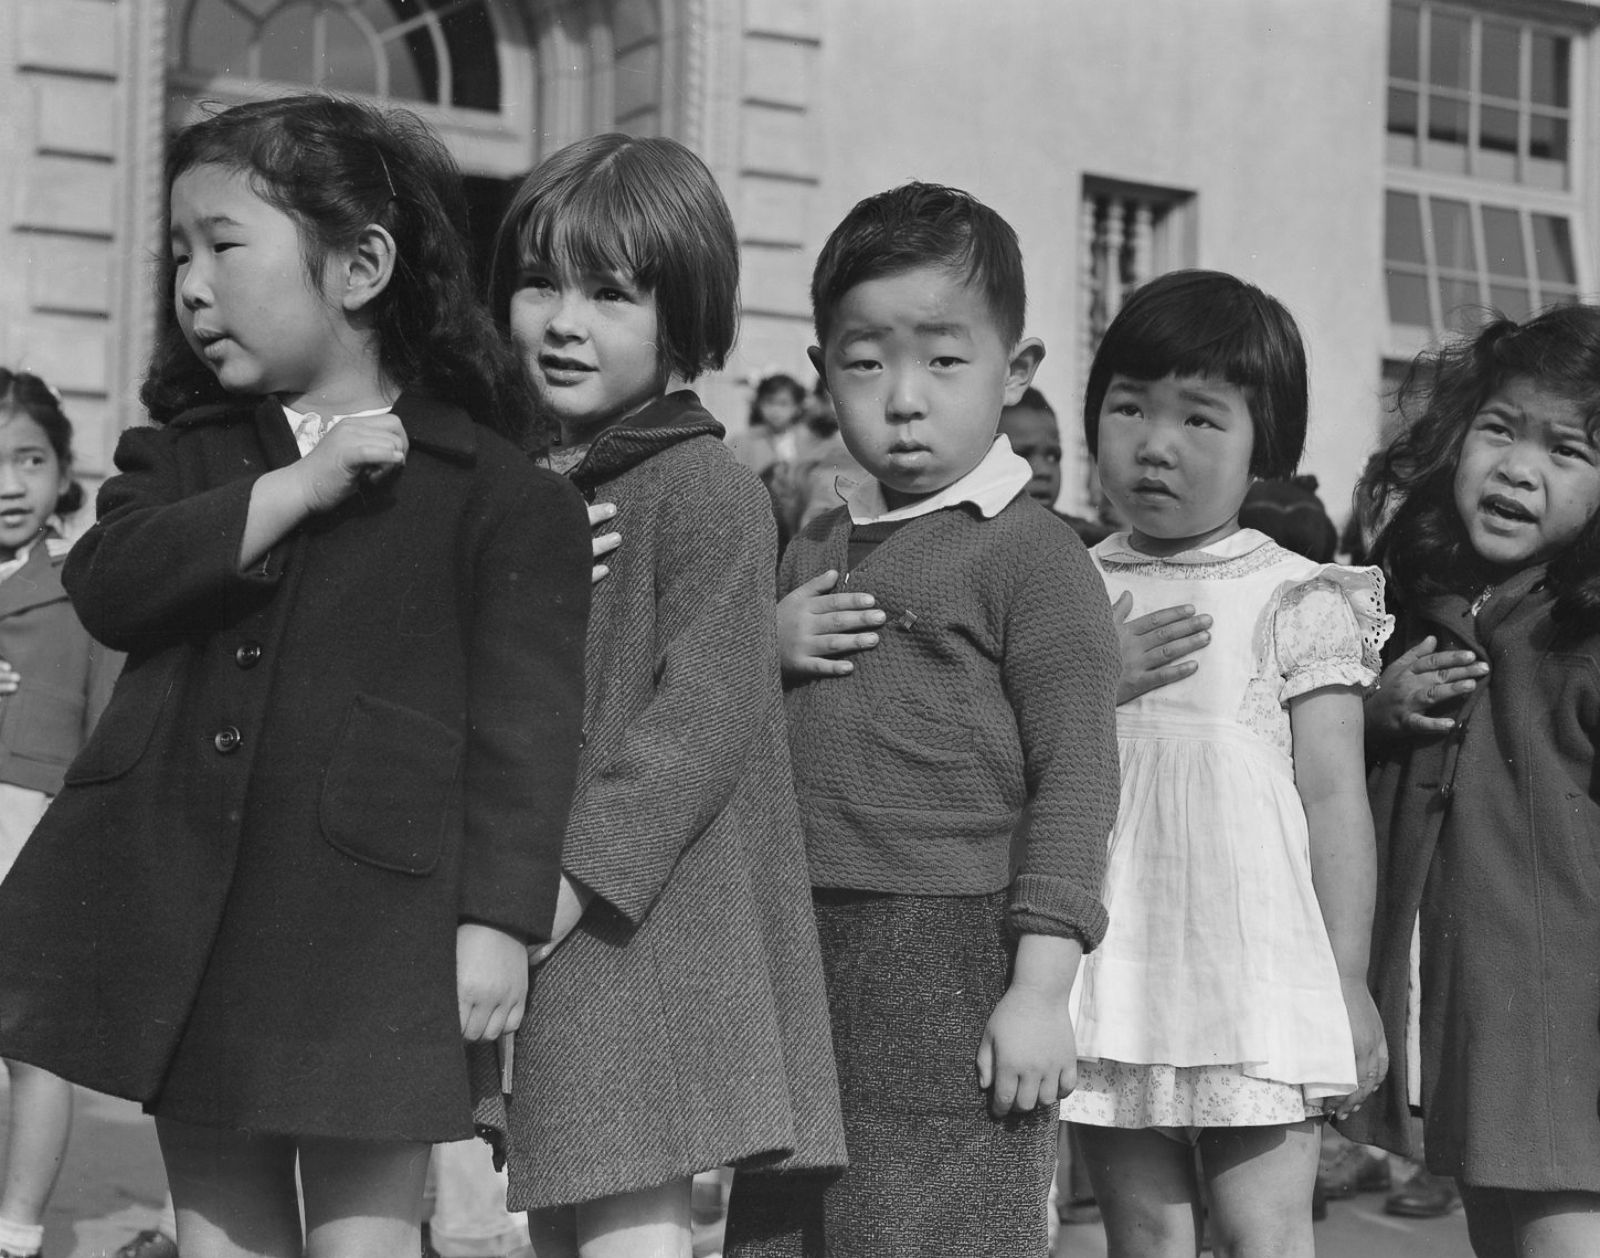 japanese american internment camps essay